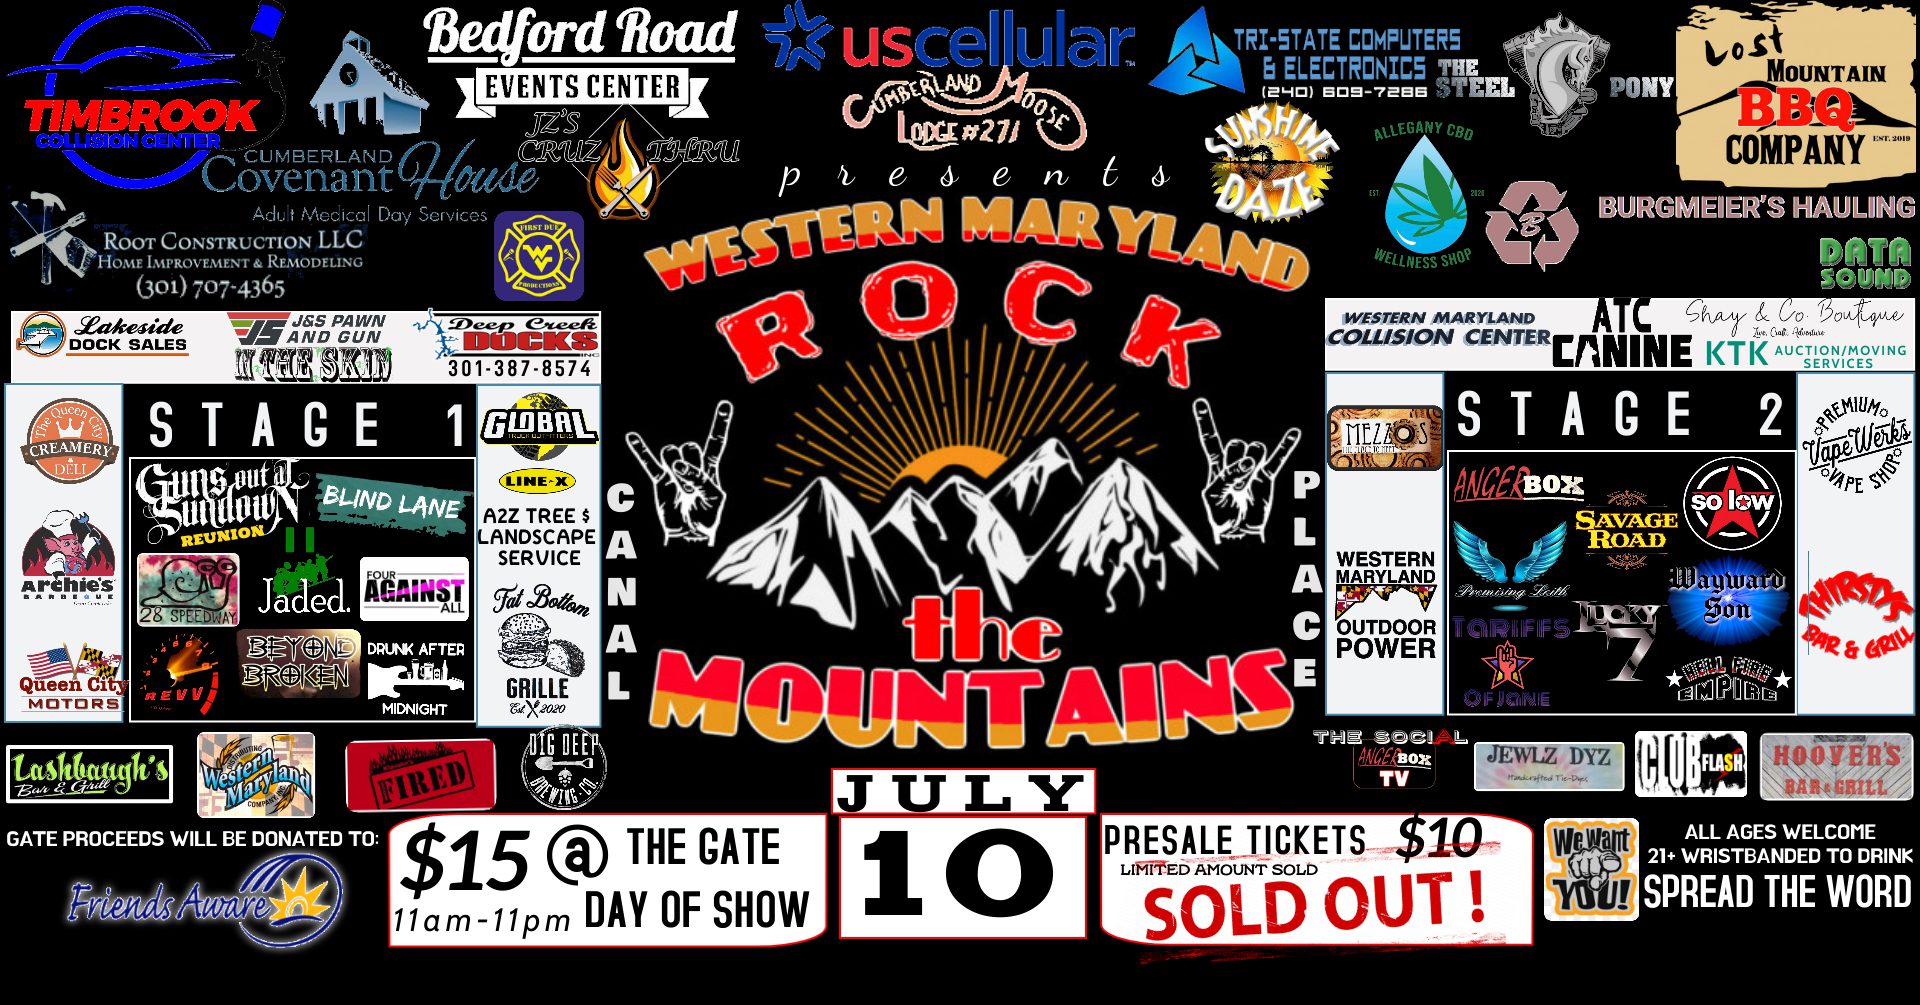 A poster for rock the mountains.